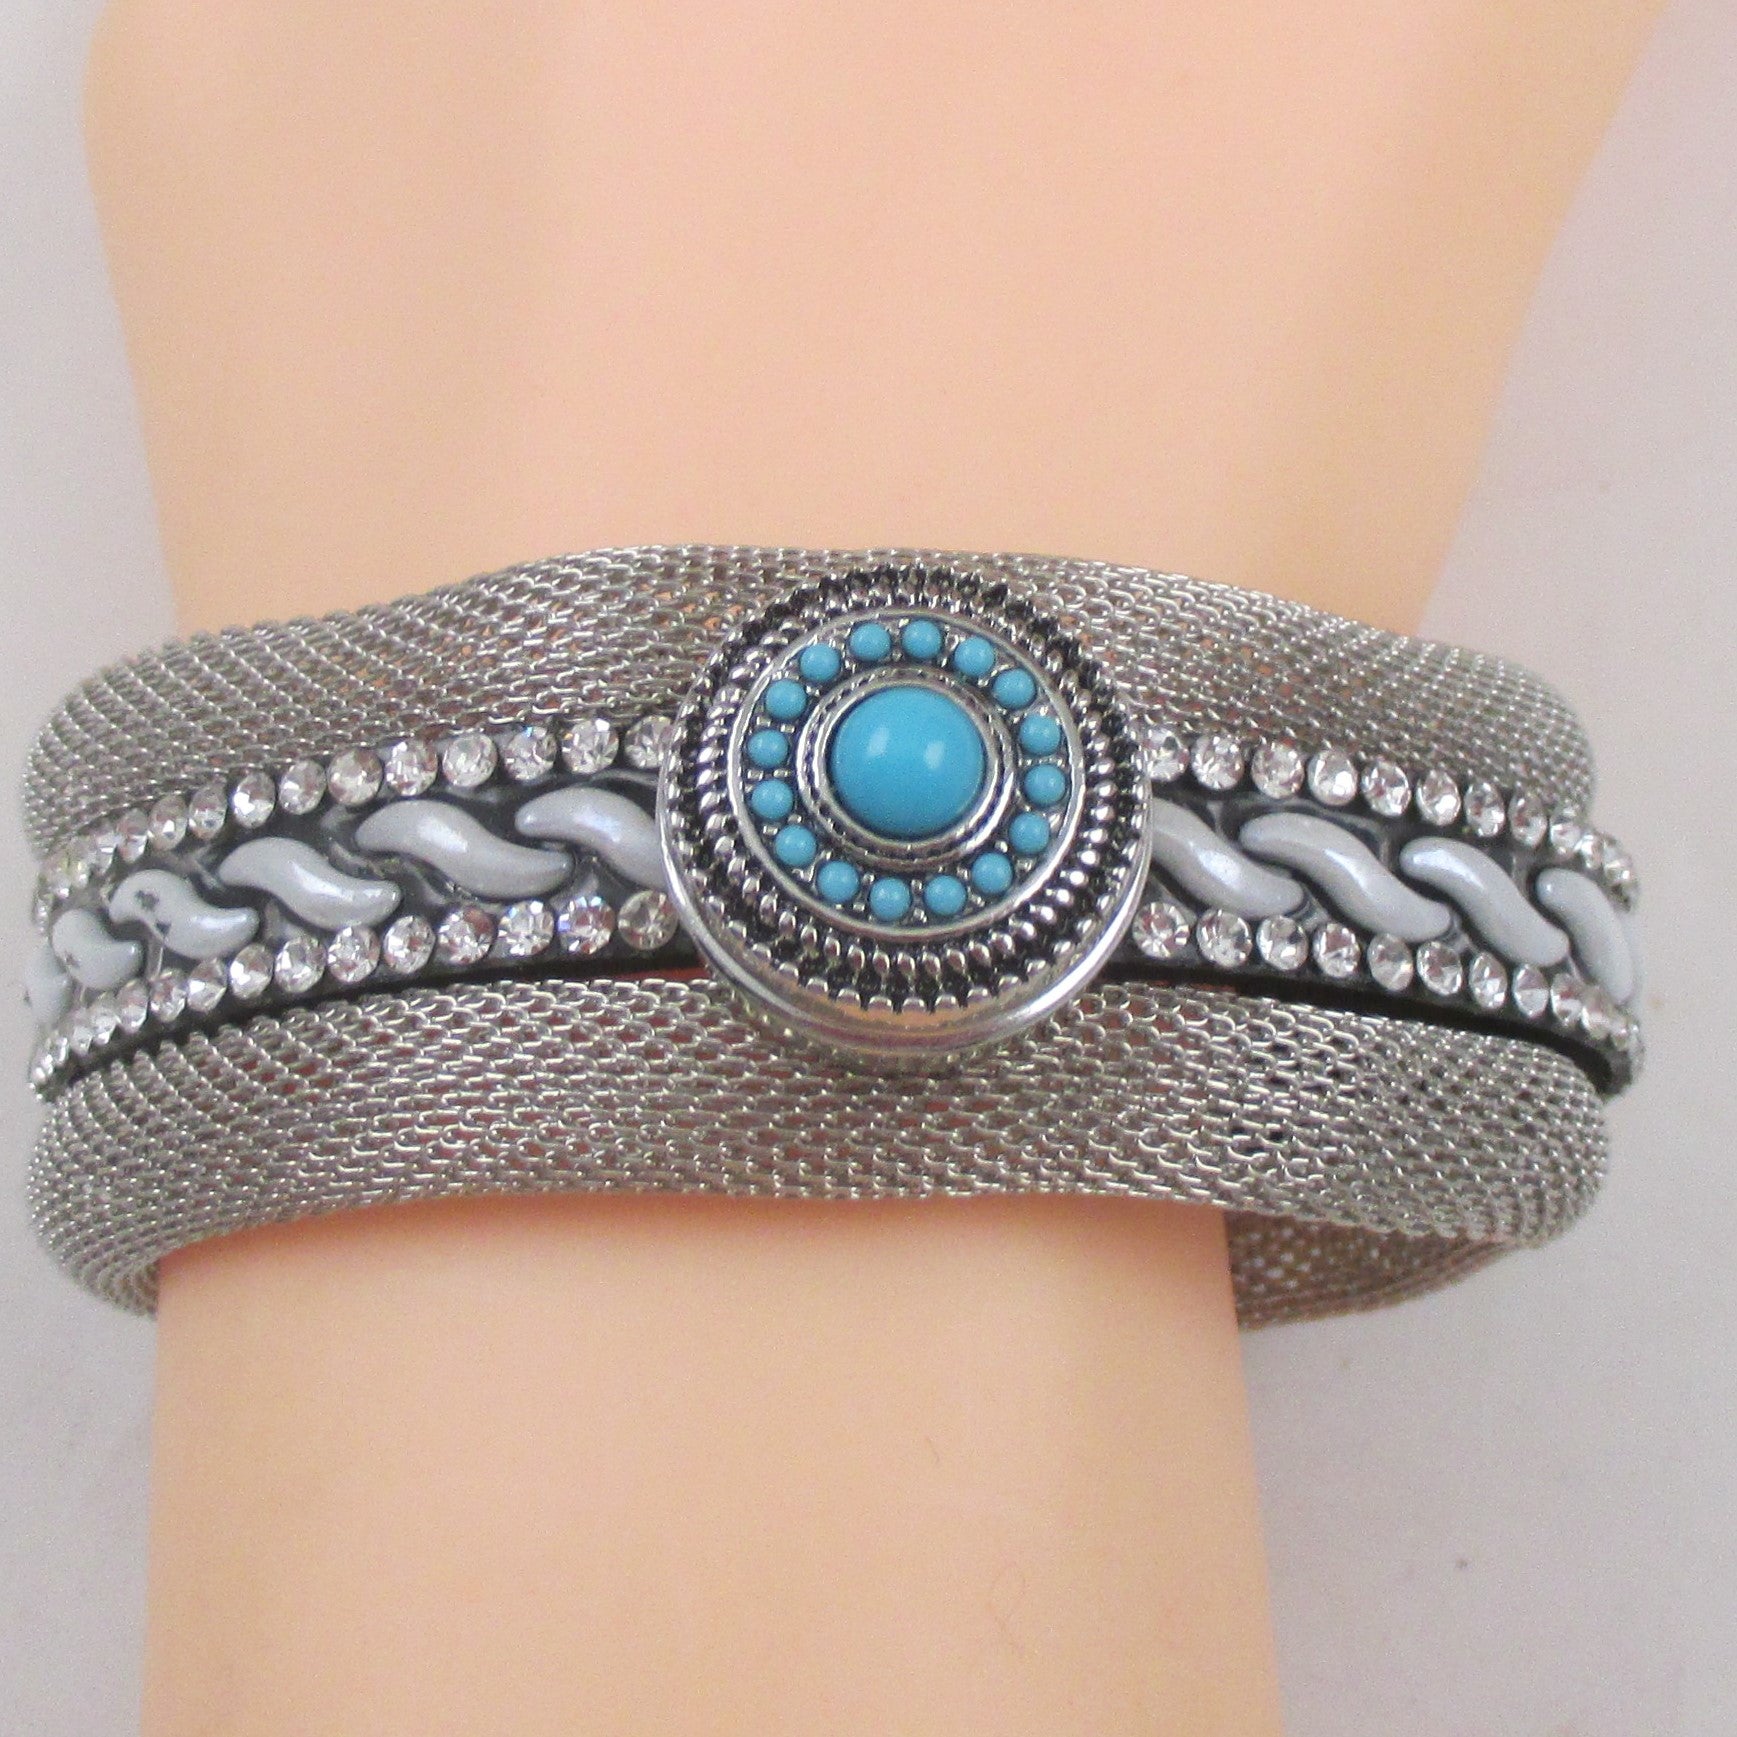 Silver Mesh Bracelet with Rhinestone & Turquoise Accent - VP's Jewelry